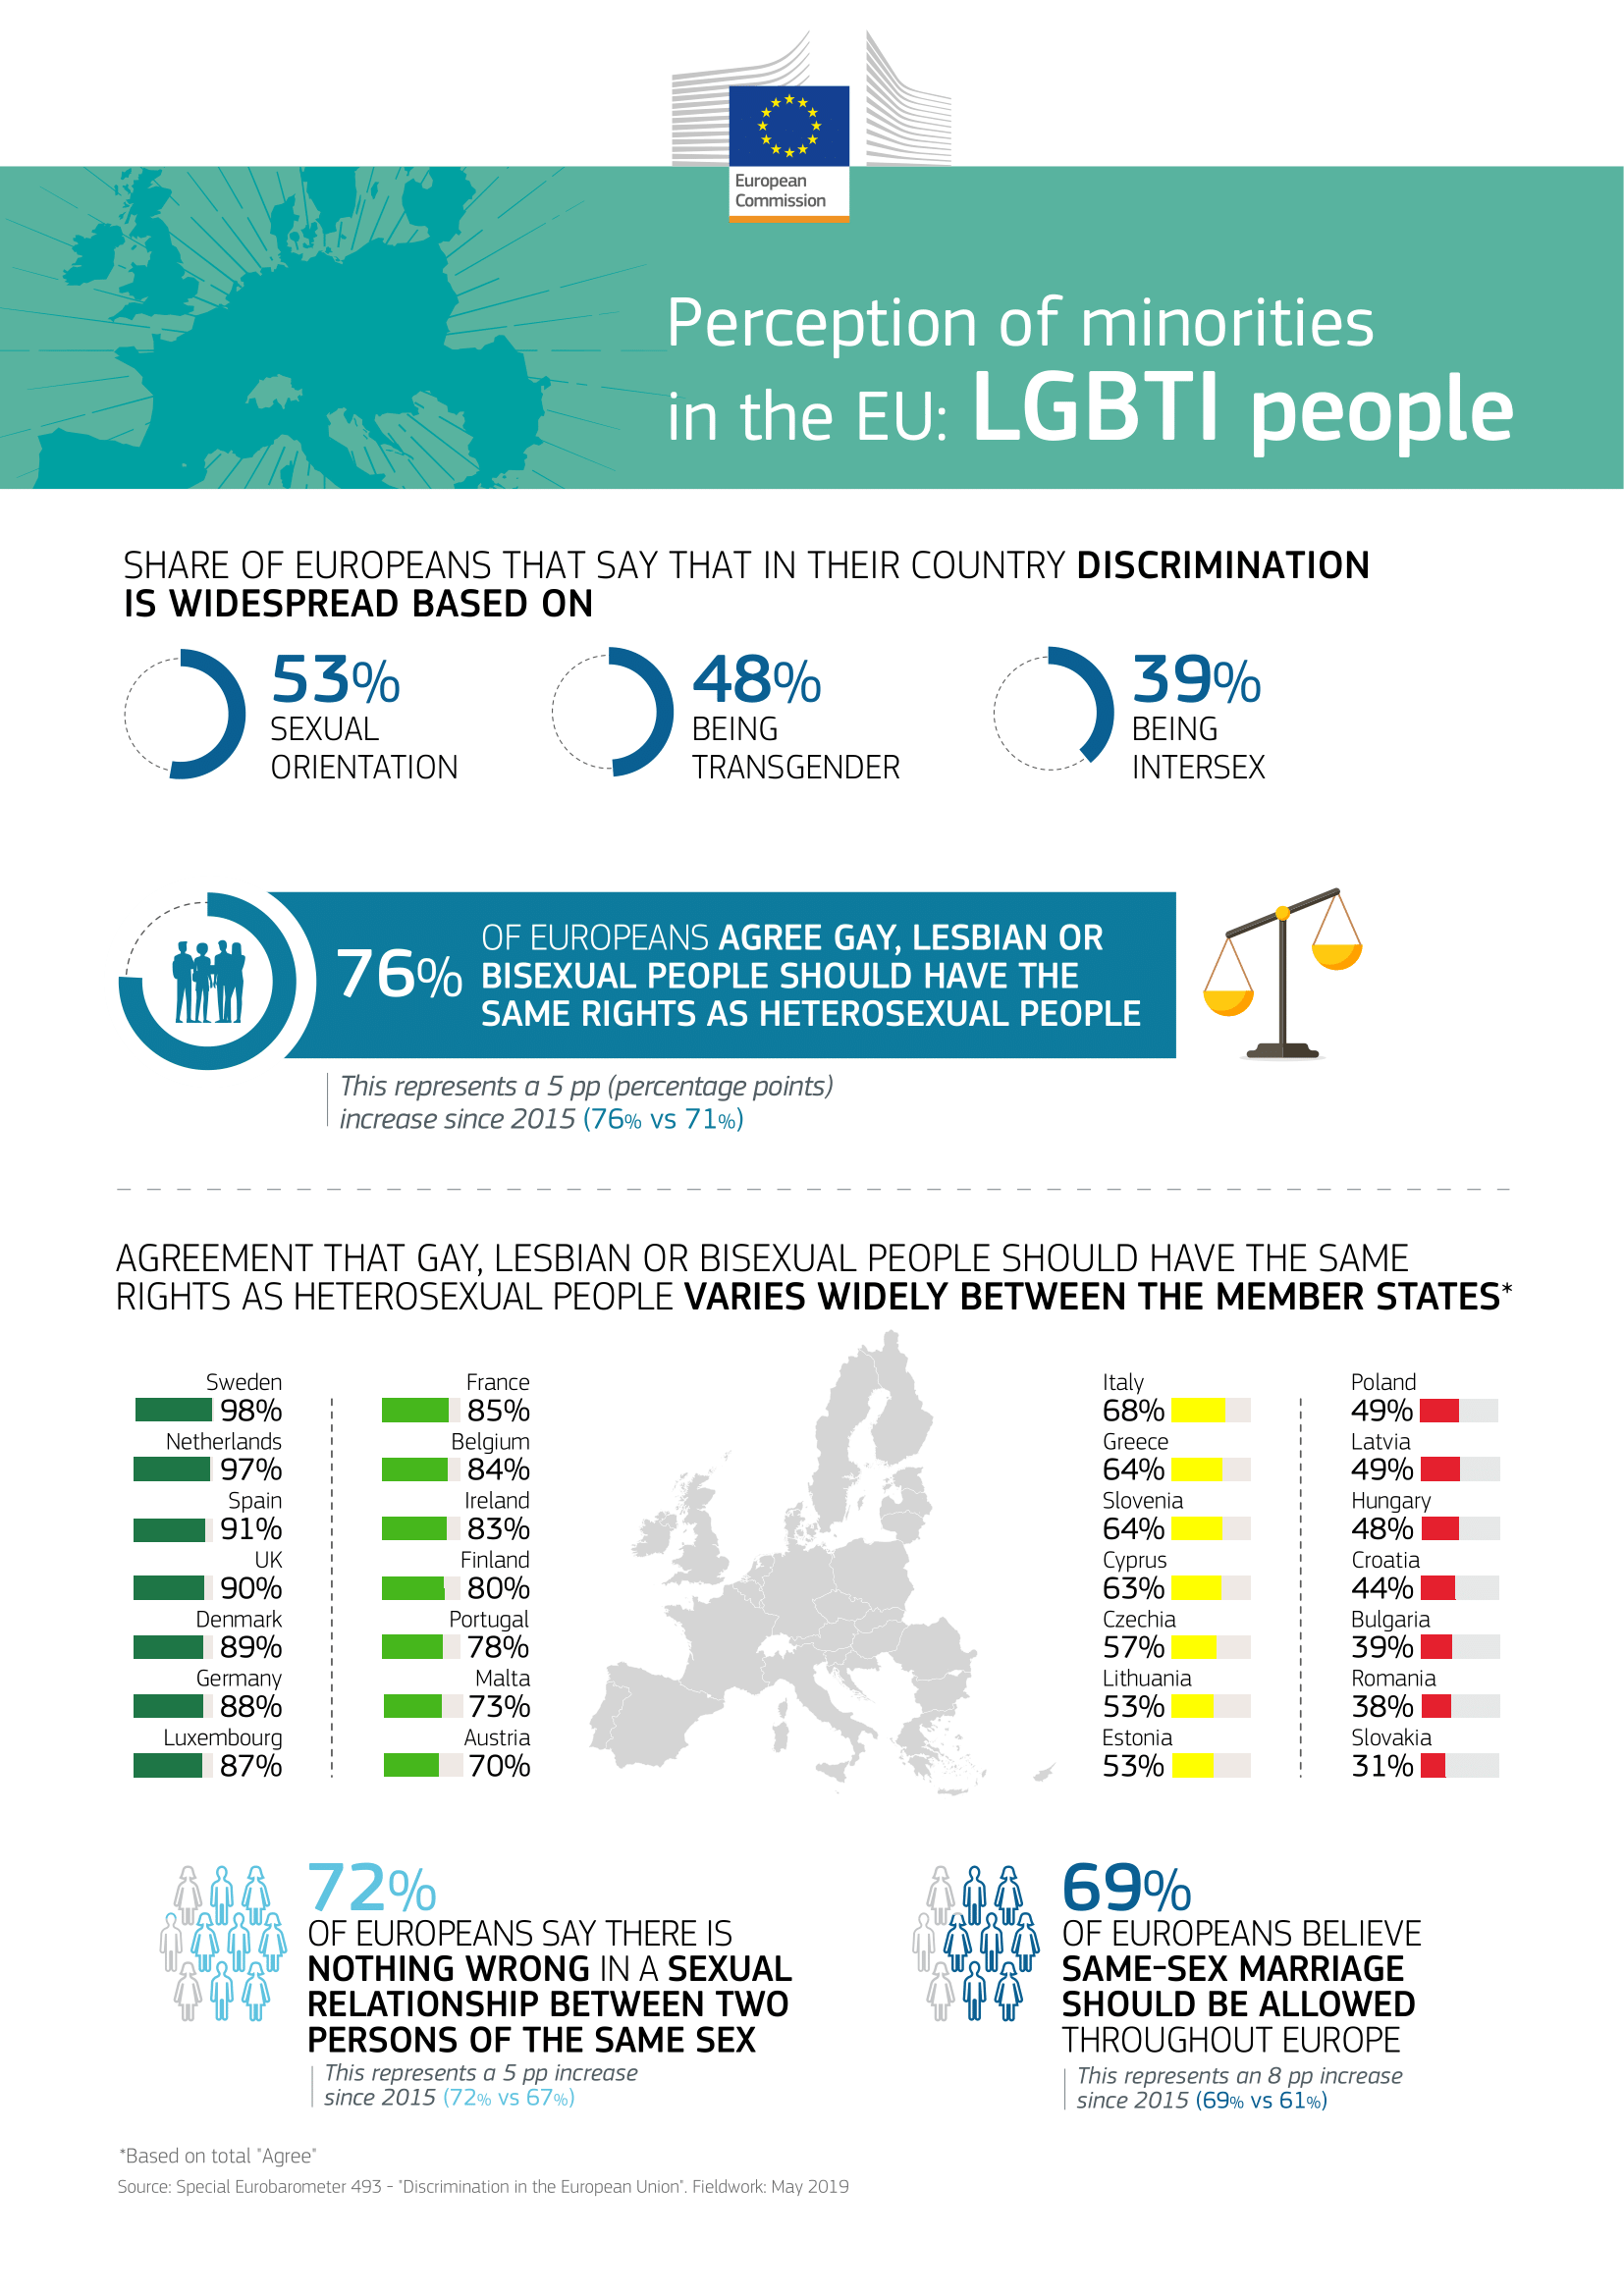 European Commission 🇪🇺 Twitter: "53% of say that in their country, discrimination based on sexual is widespread. More from the Eurobarometer survey: https://t.co/vd3S1NnCfs #EU4LGBTI https://t.co/eSF0pOesX2" / Twitter